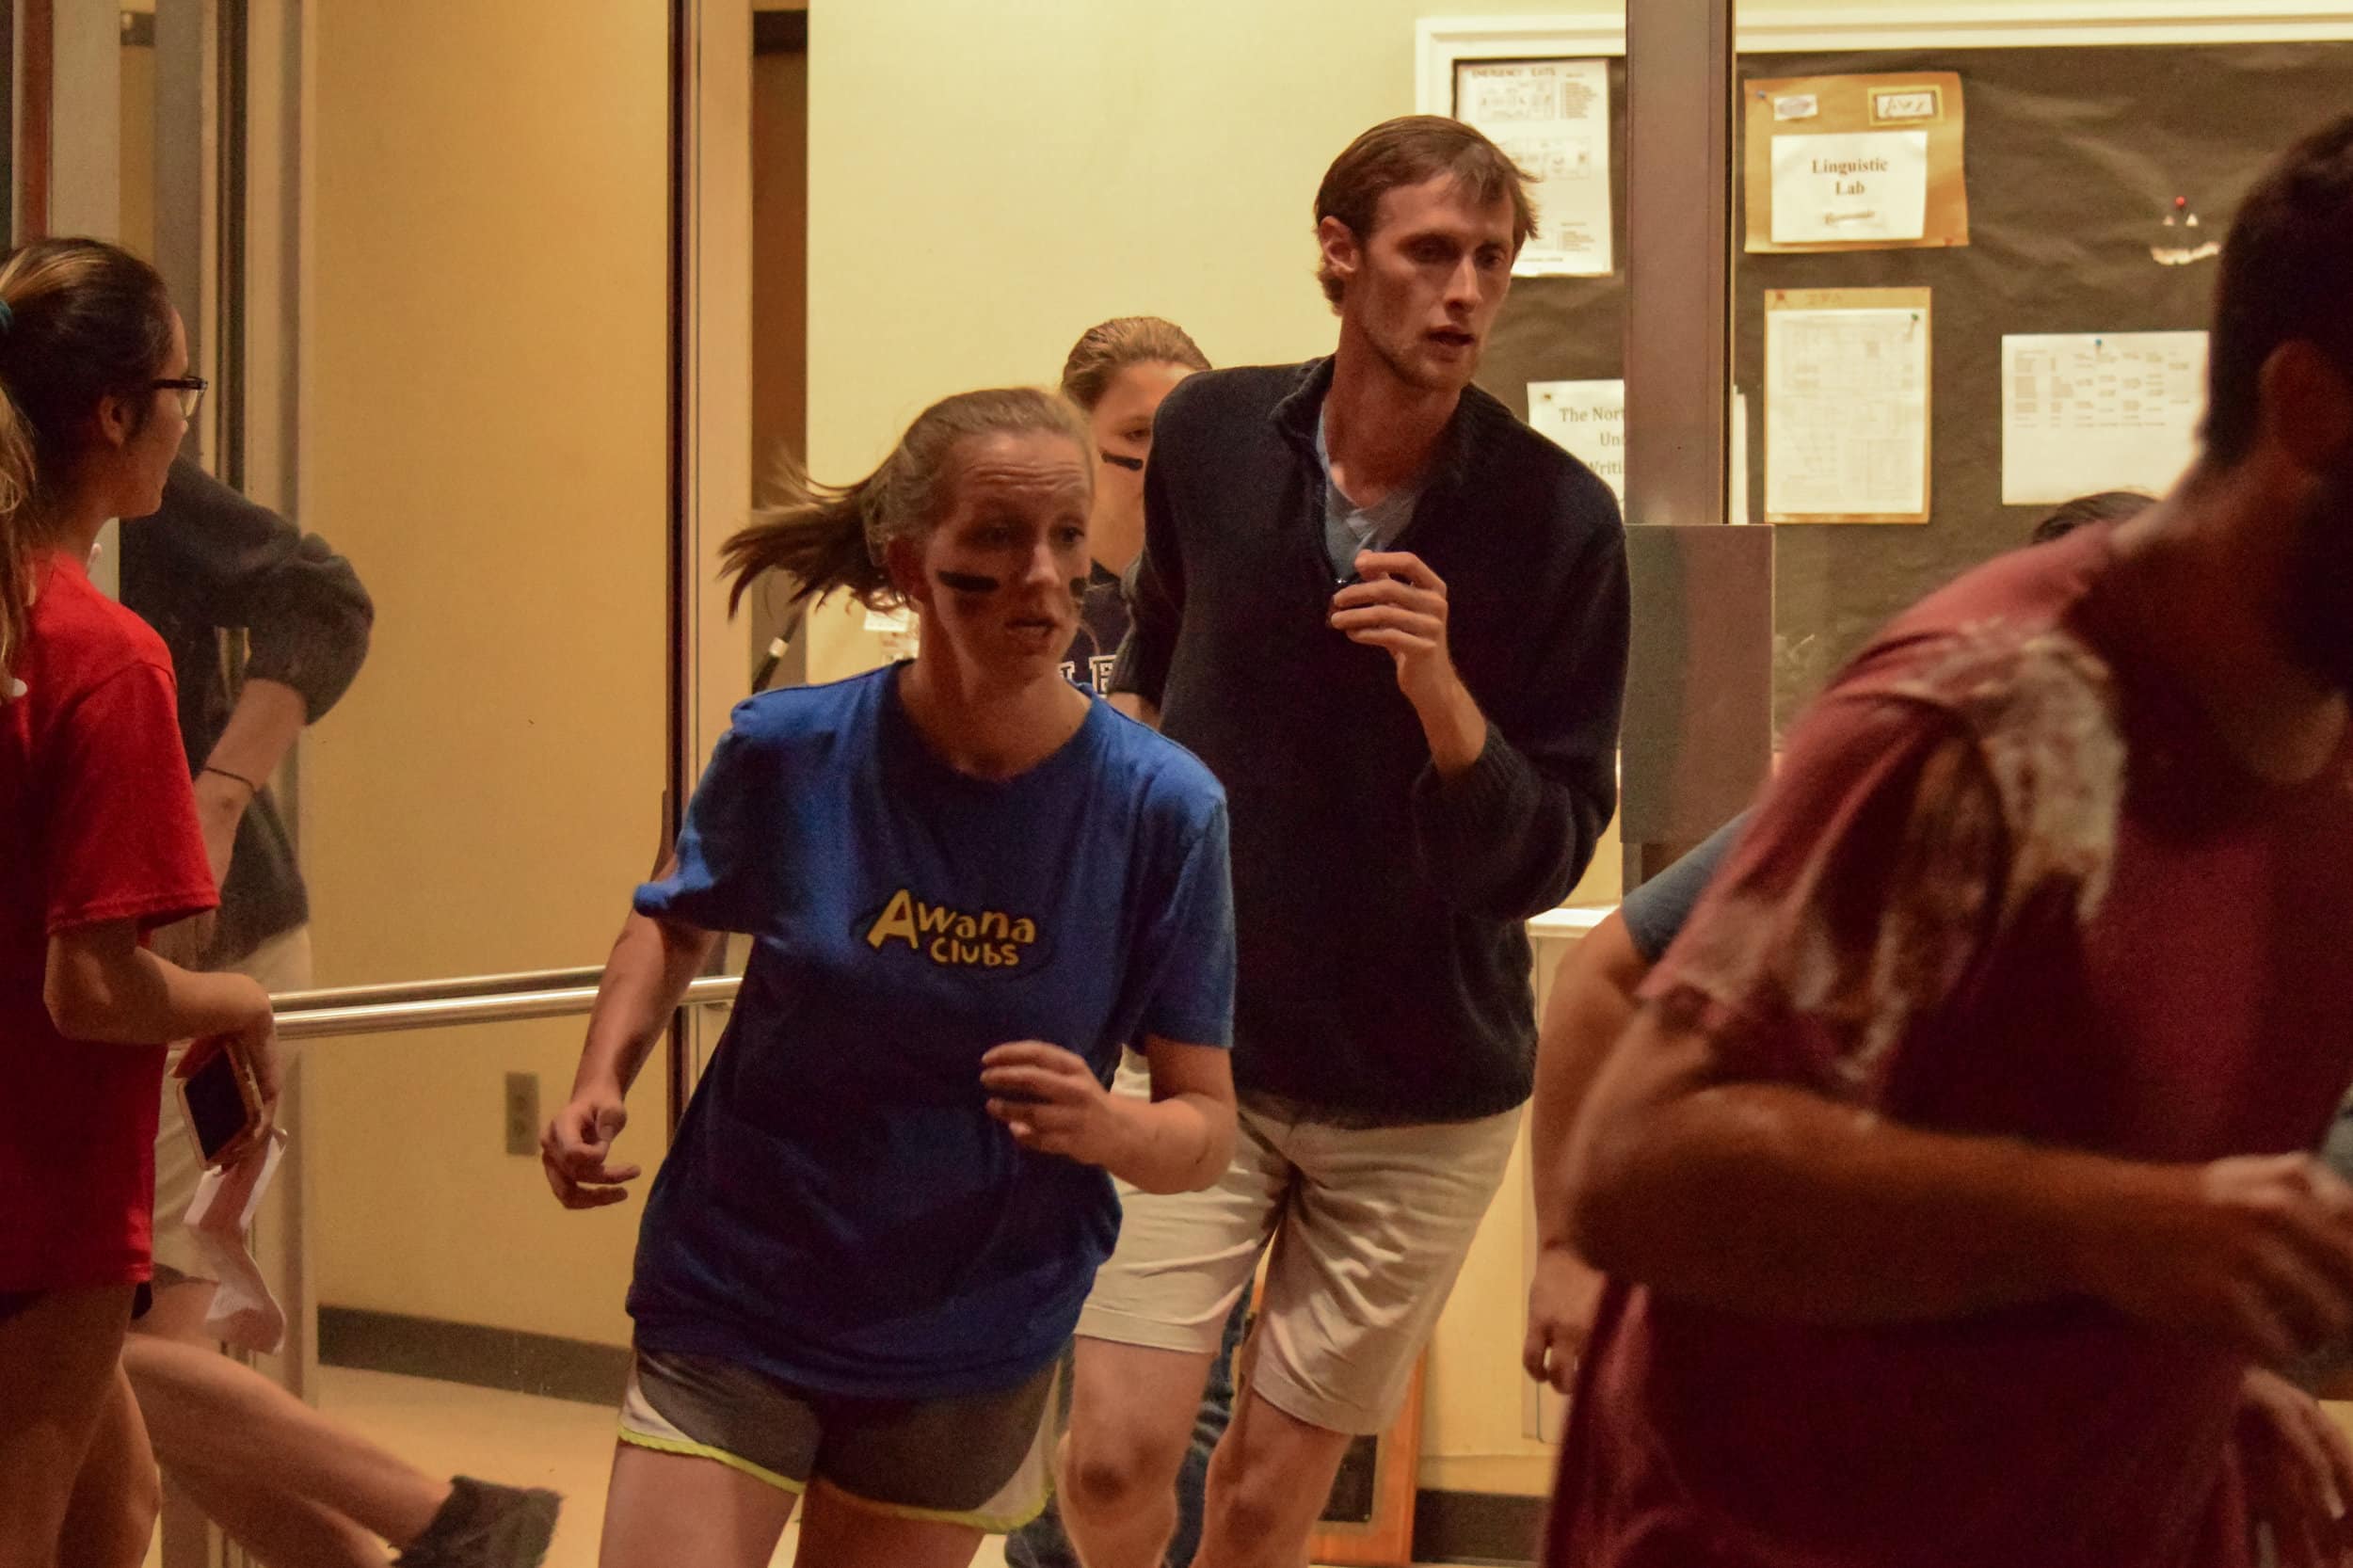 Education club members Cody Pendarvis, senior, and Constance Revis, junior, rush after their team as they finish the trivia section of the race.